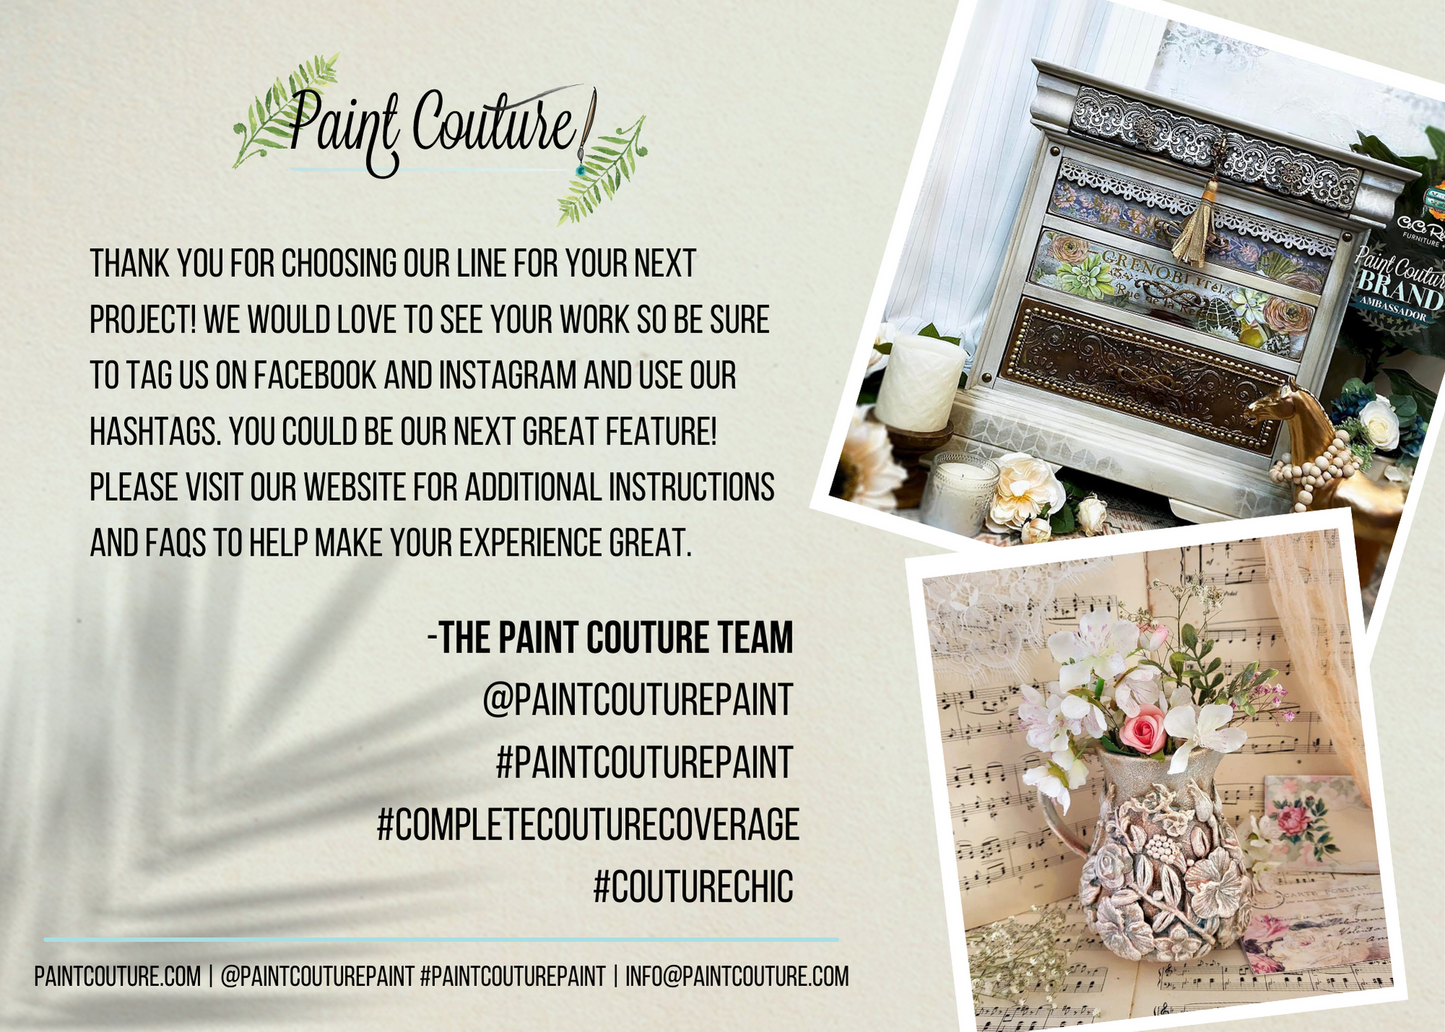 Paint Couture Colors of Sweden Queens Court